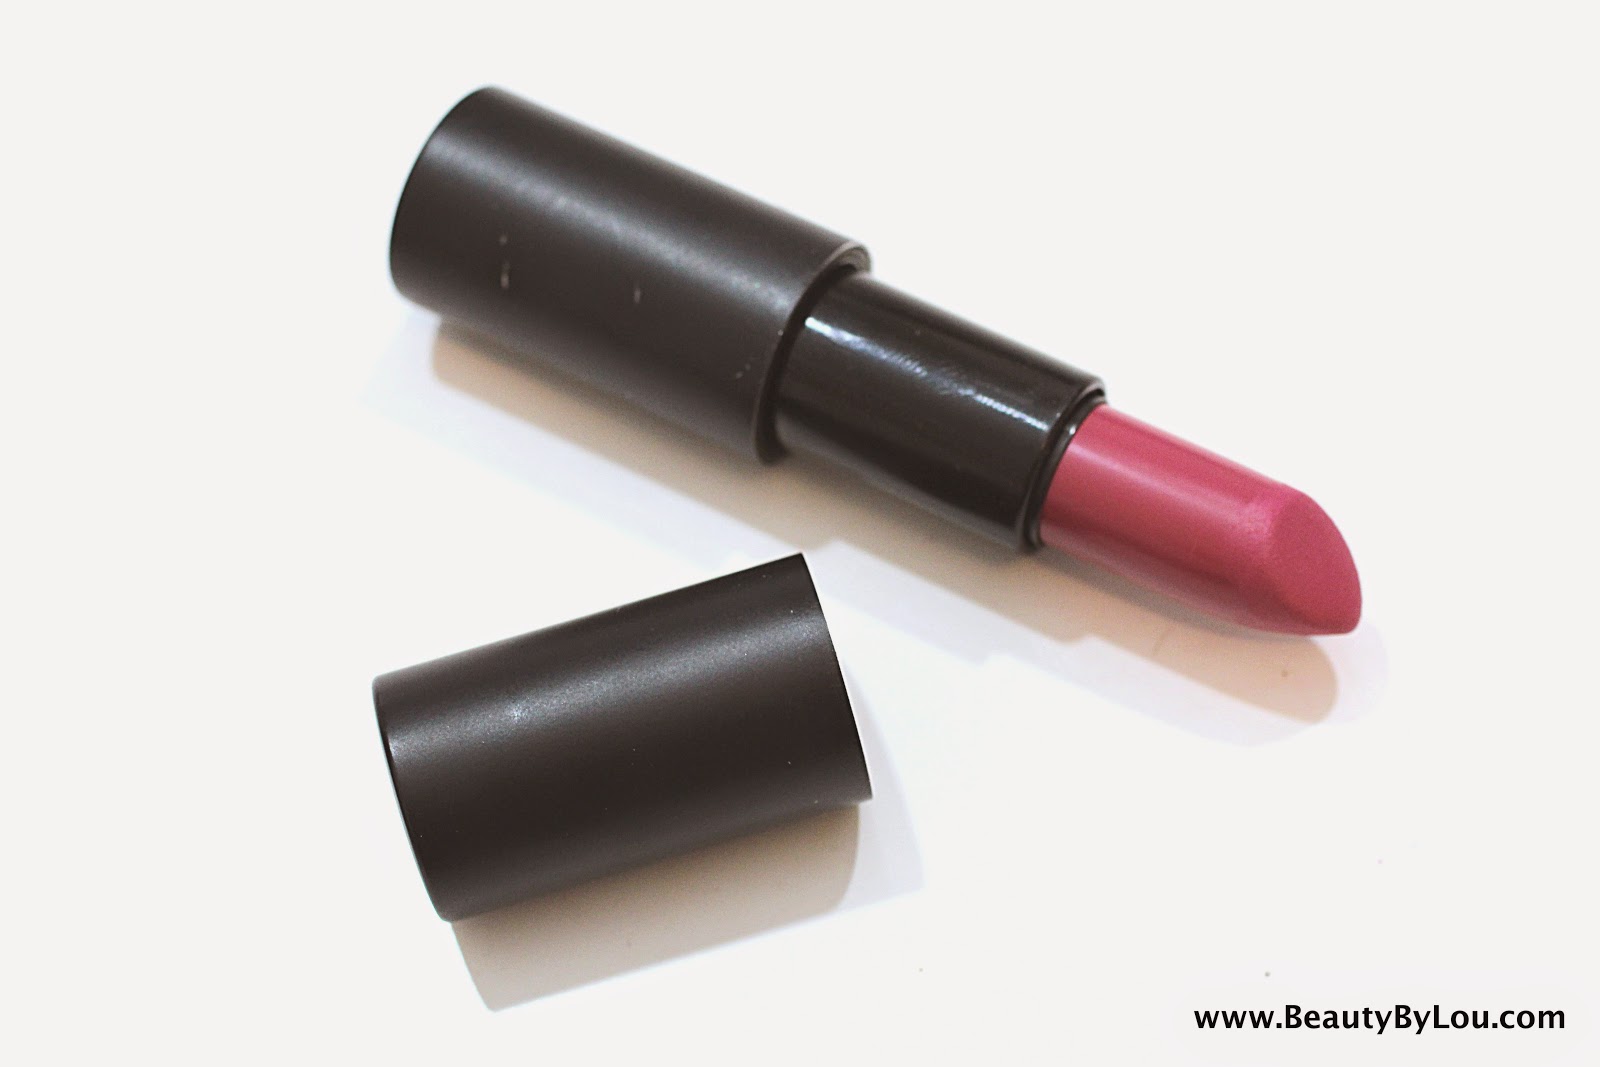 http://www.beautybylou.com/2014/10/Biguine-rouge-a-levres-mat-grenade-poudree.html